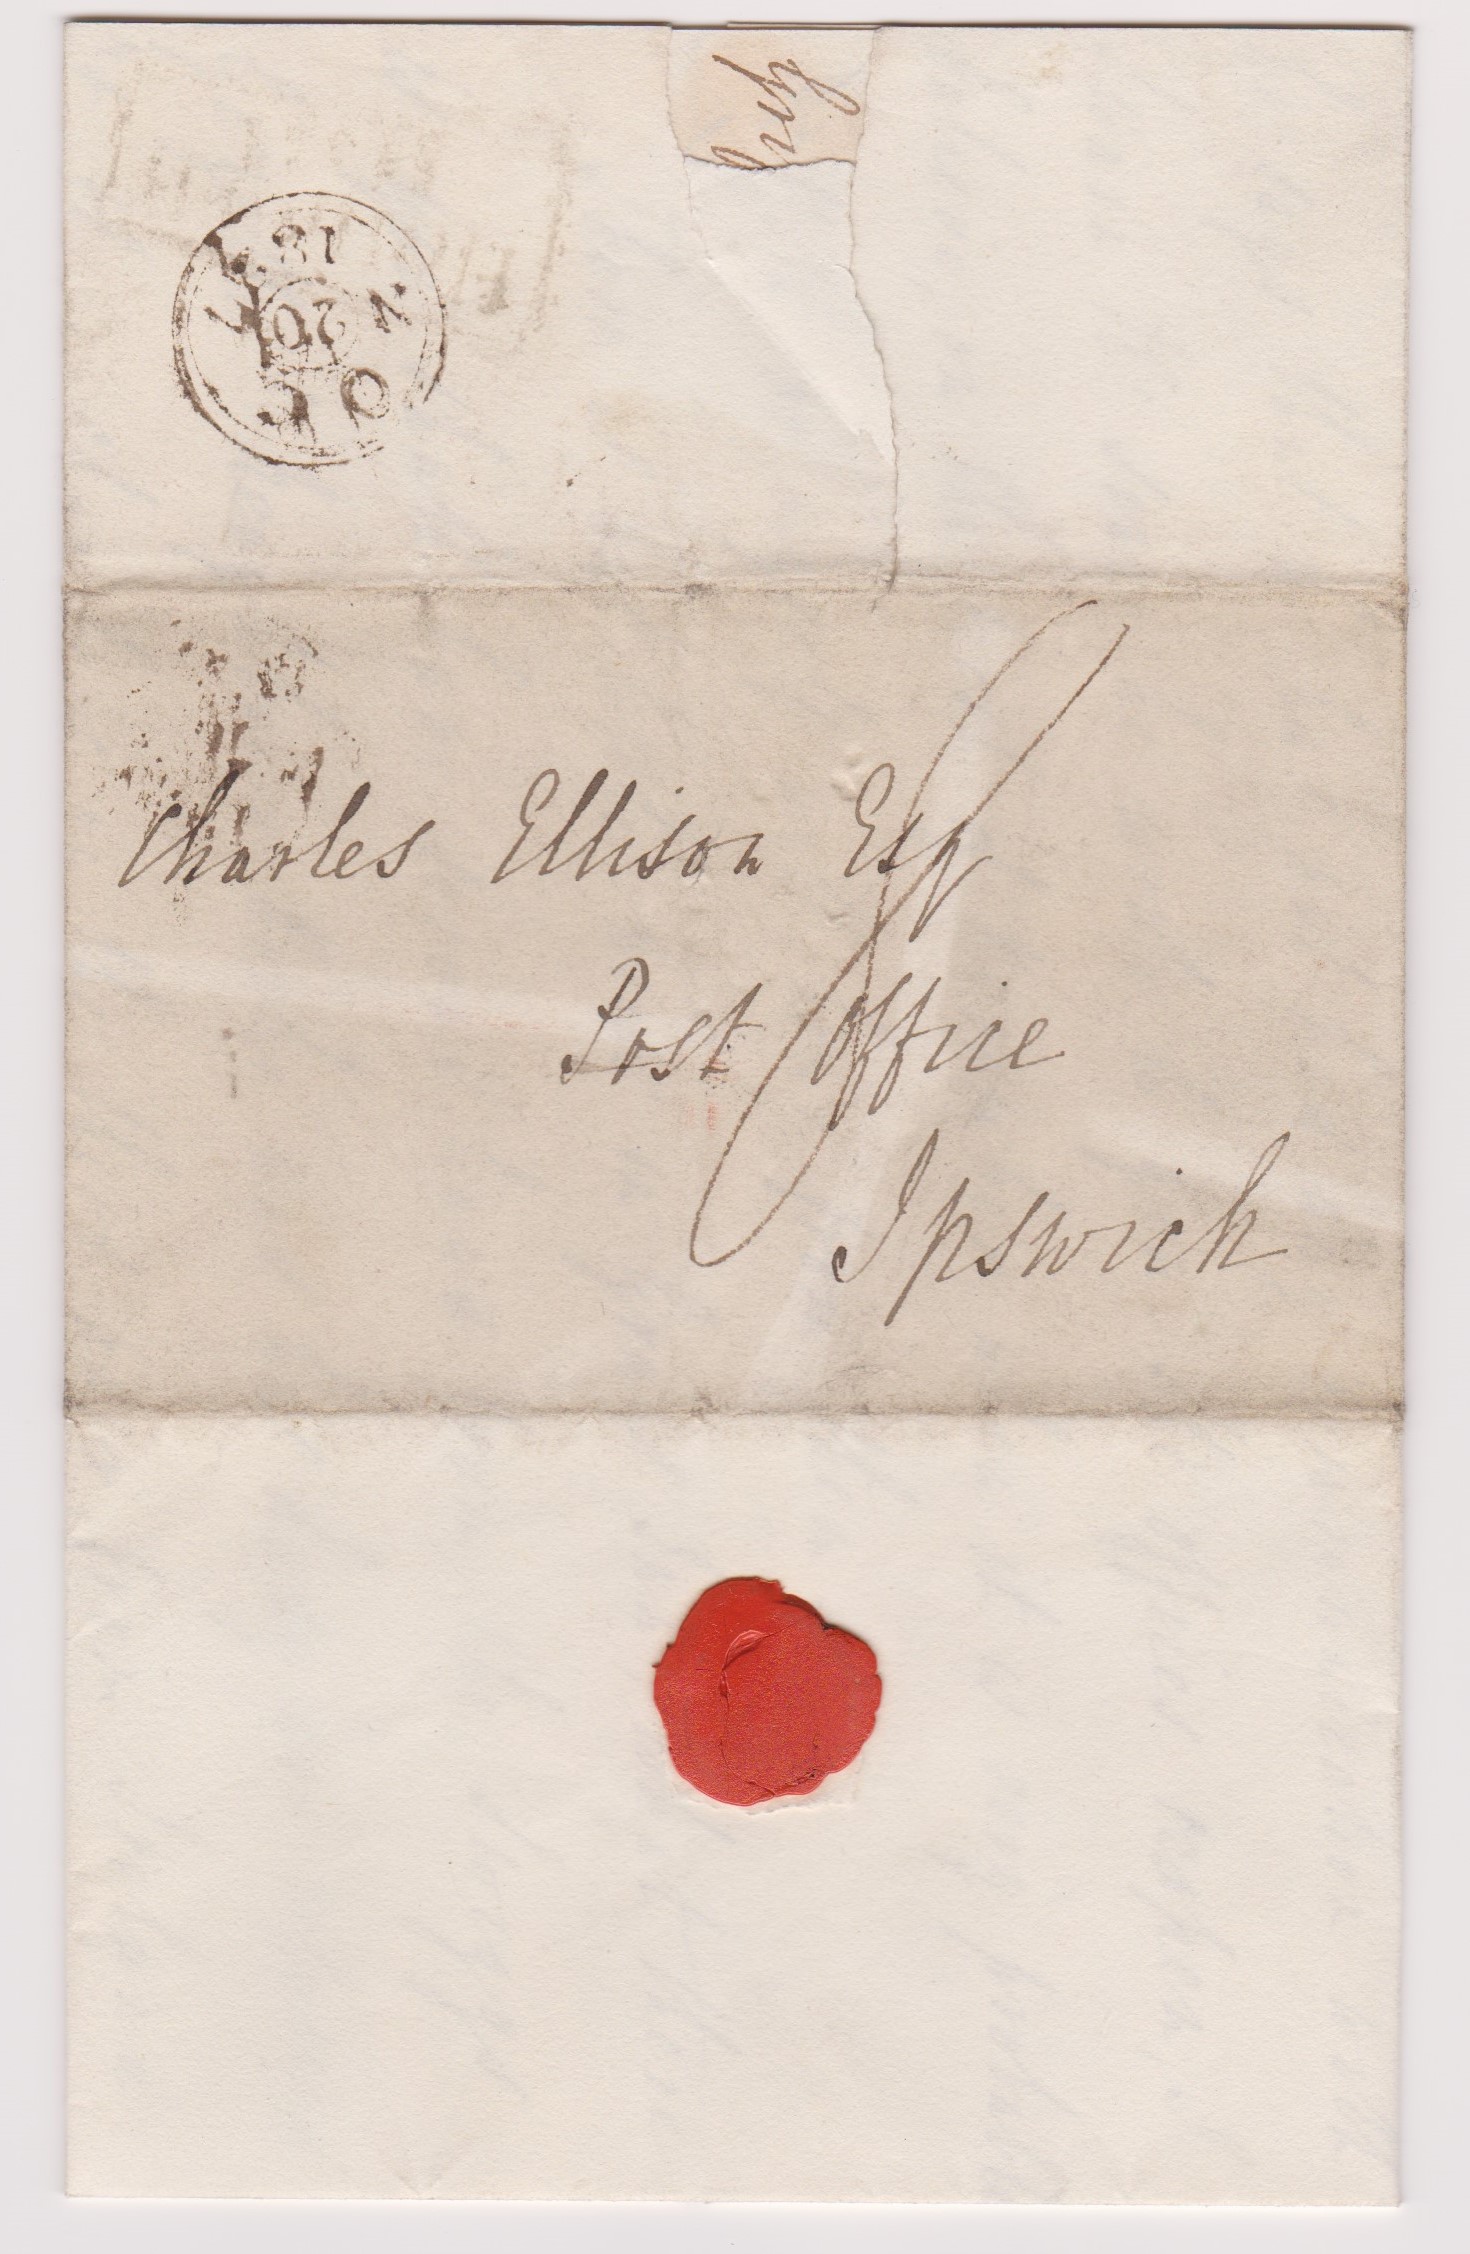 Great Britain 1827-Postal History-EL dated 20th Oct 1827 Grays Inn posted to Ipswich black 2 ring OC